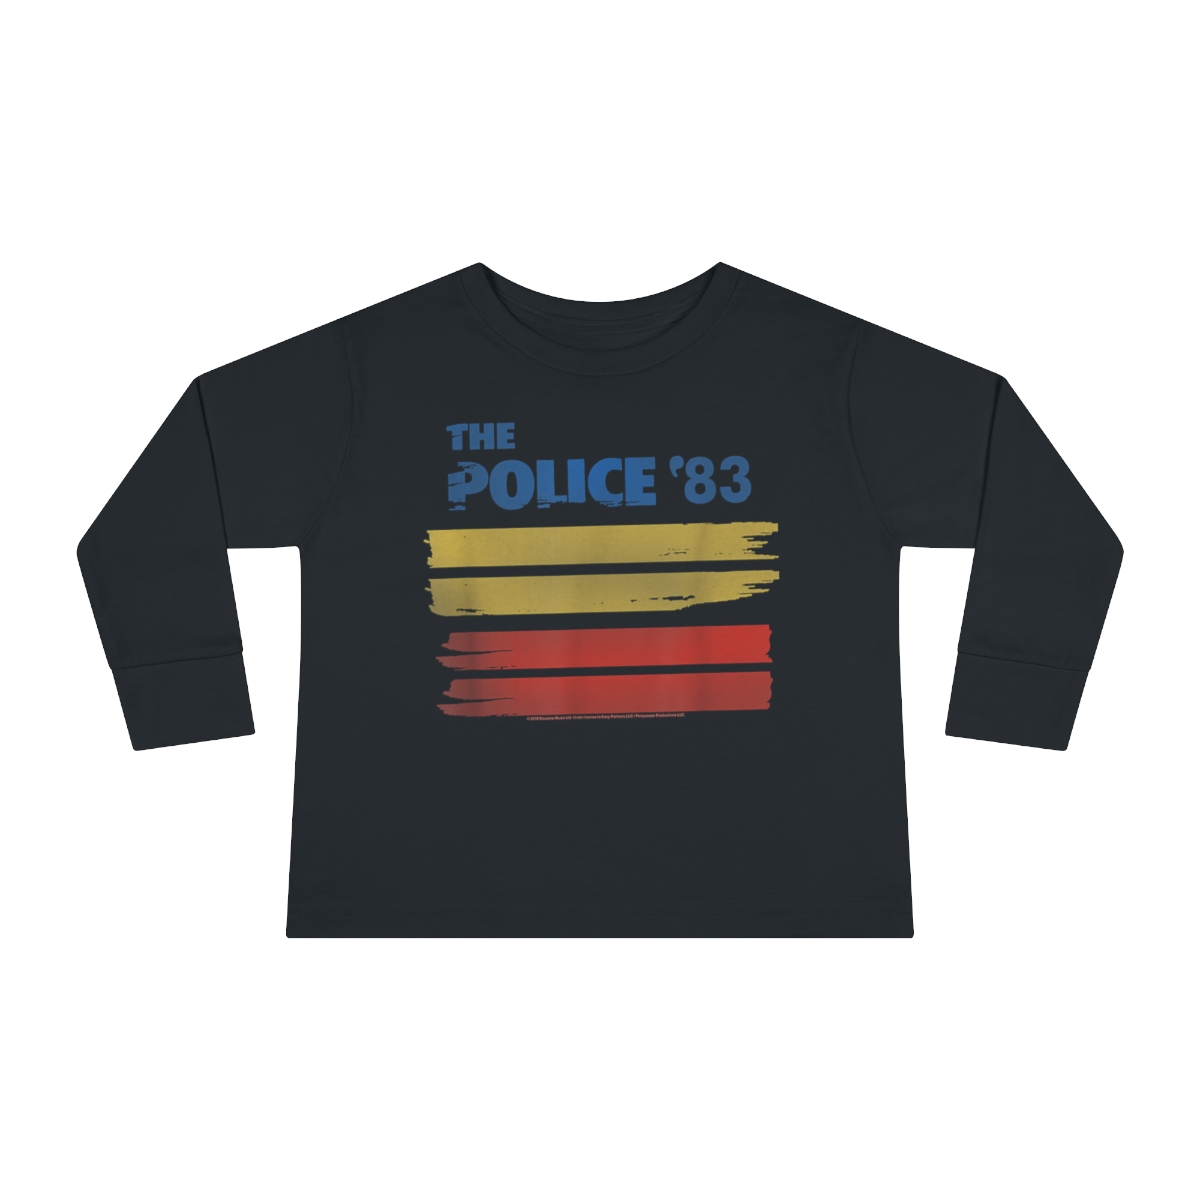 THE POLICE 83 Toddler Long Sleeve Tee